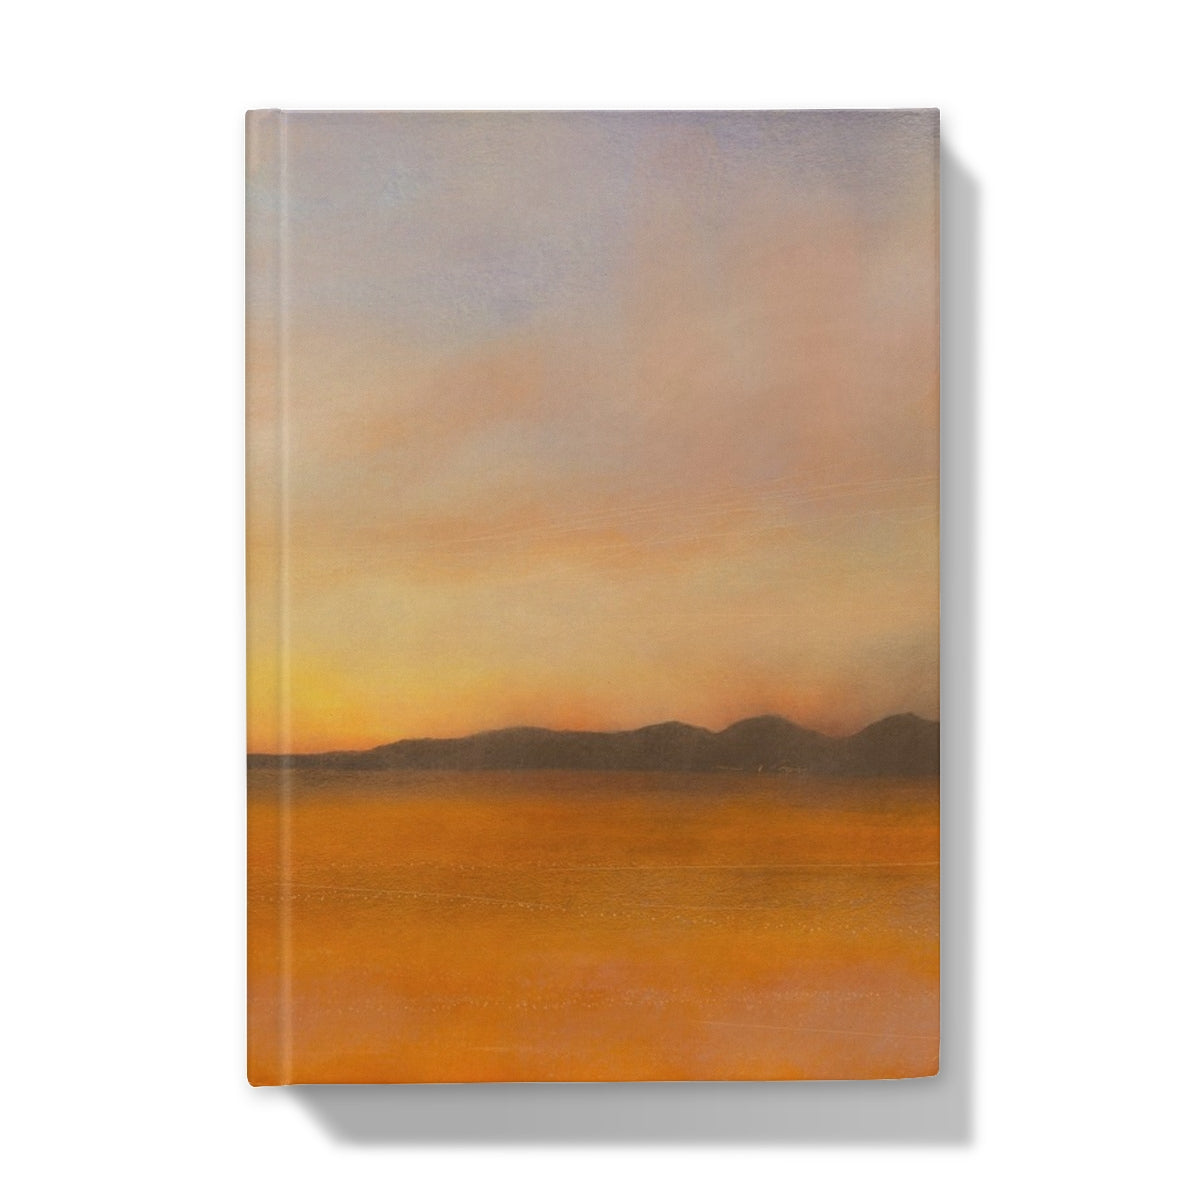 Islay Dawn Art Gifts Hardback Journal-Journals & Notebooks-Hebridean Islands Art Gallery-5"x7"-Lined-Paintings, Prints, Homeware, Art Gifts From Scotland By Scottish Artist Kevin Hunter